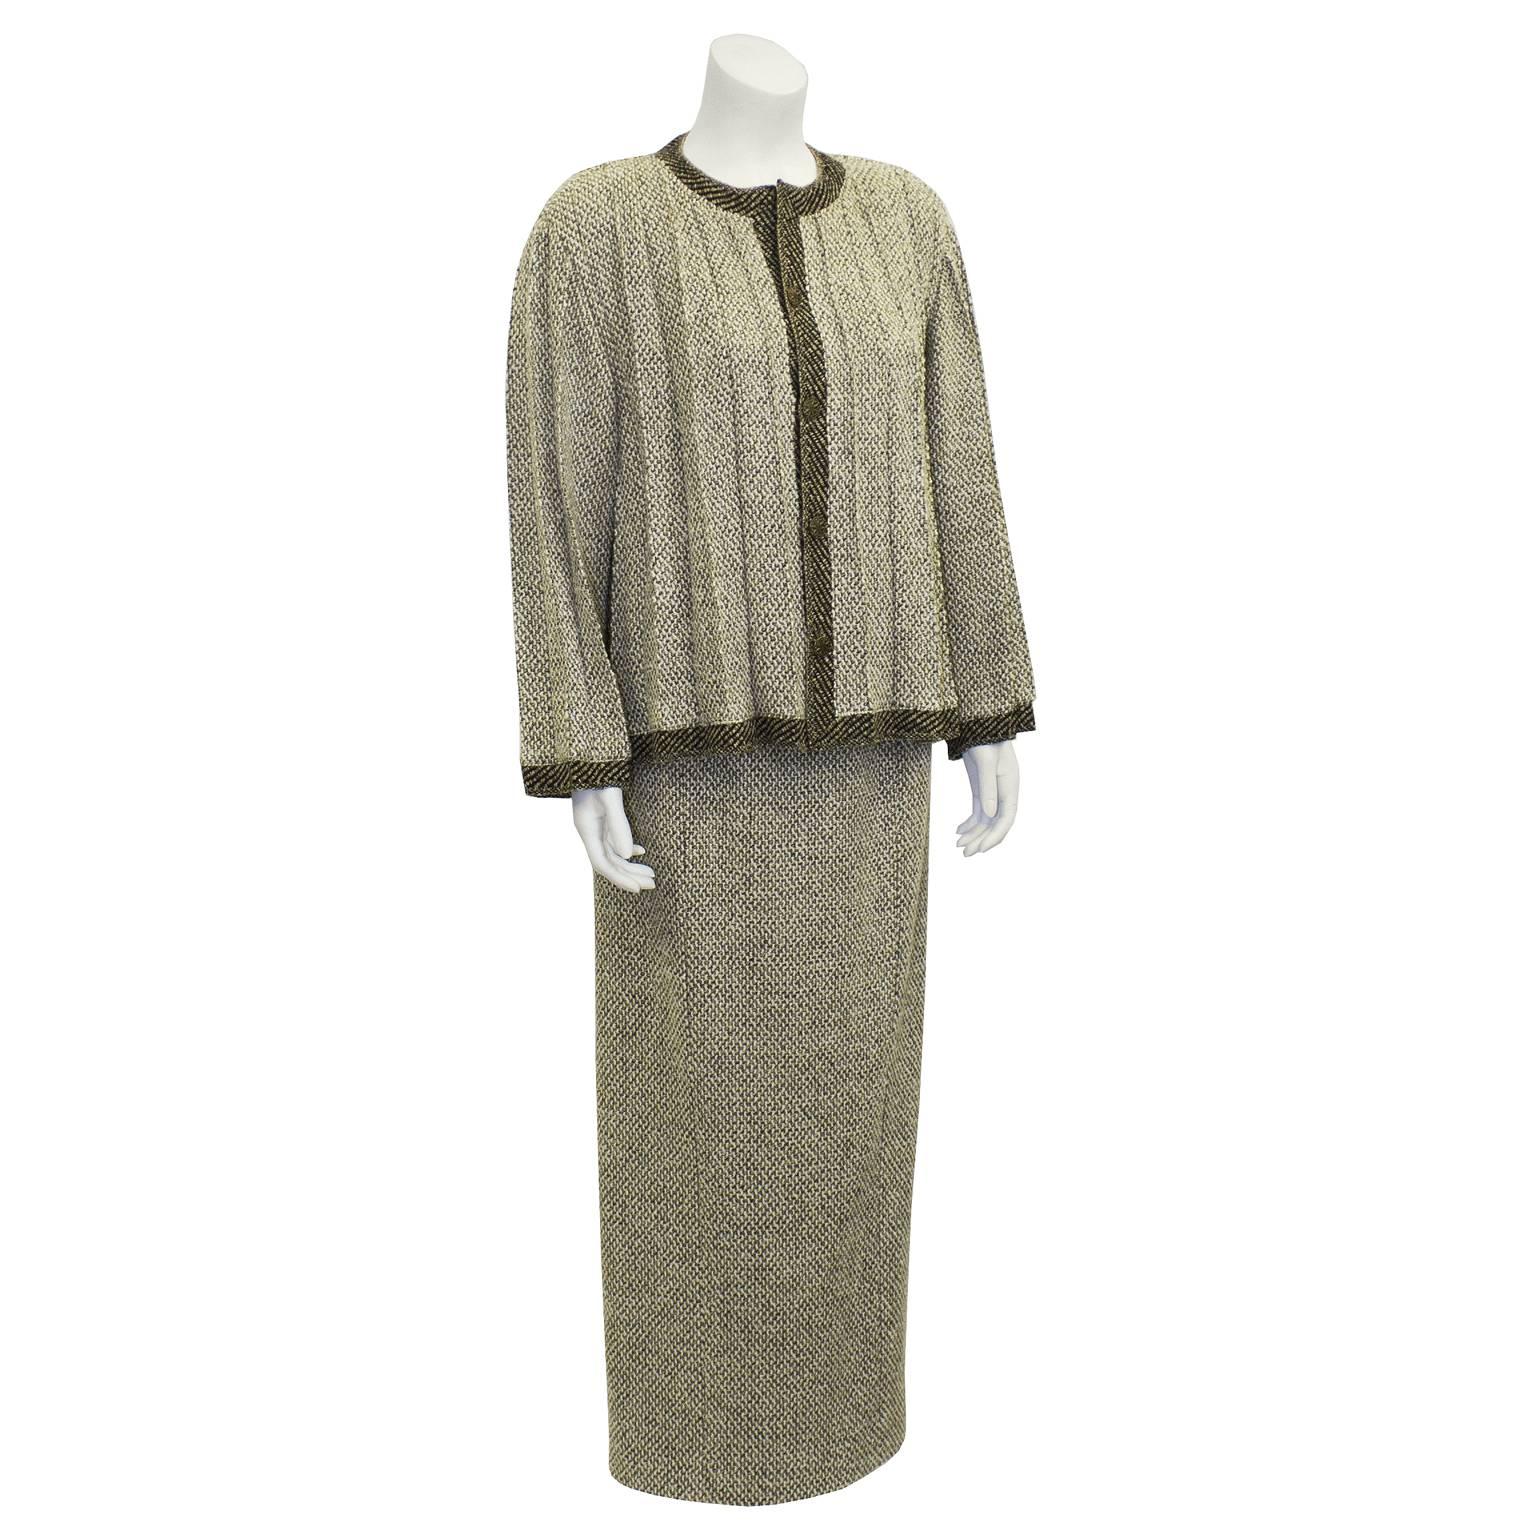 This amazing 1998 Chanel two tone brown tweed skirt suit is a unique set with its pleated swing style jacket and optional rope belt. Jacket is trimmed in a darker brown color and has antiqued bronze buttons wheel motif and CC logo in the center.